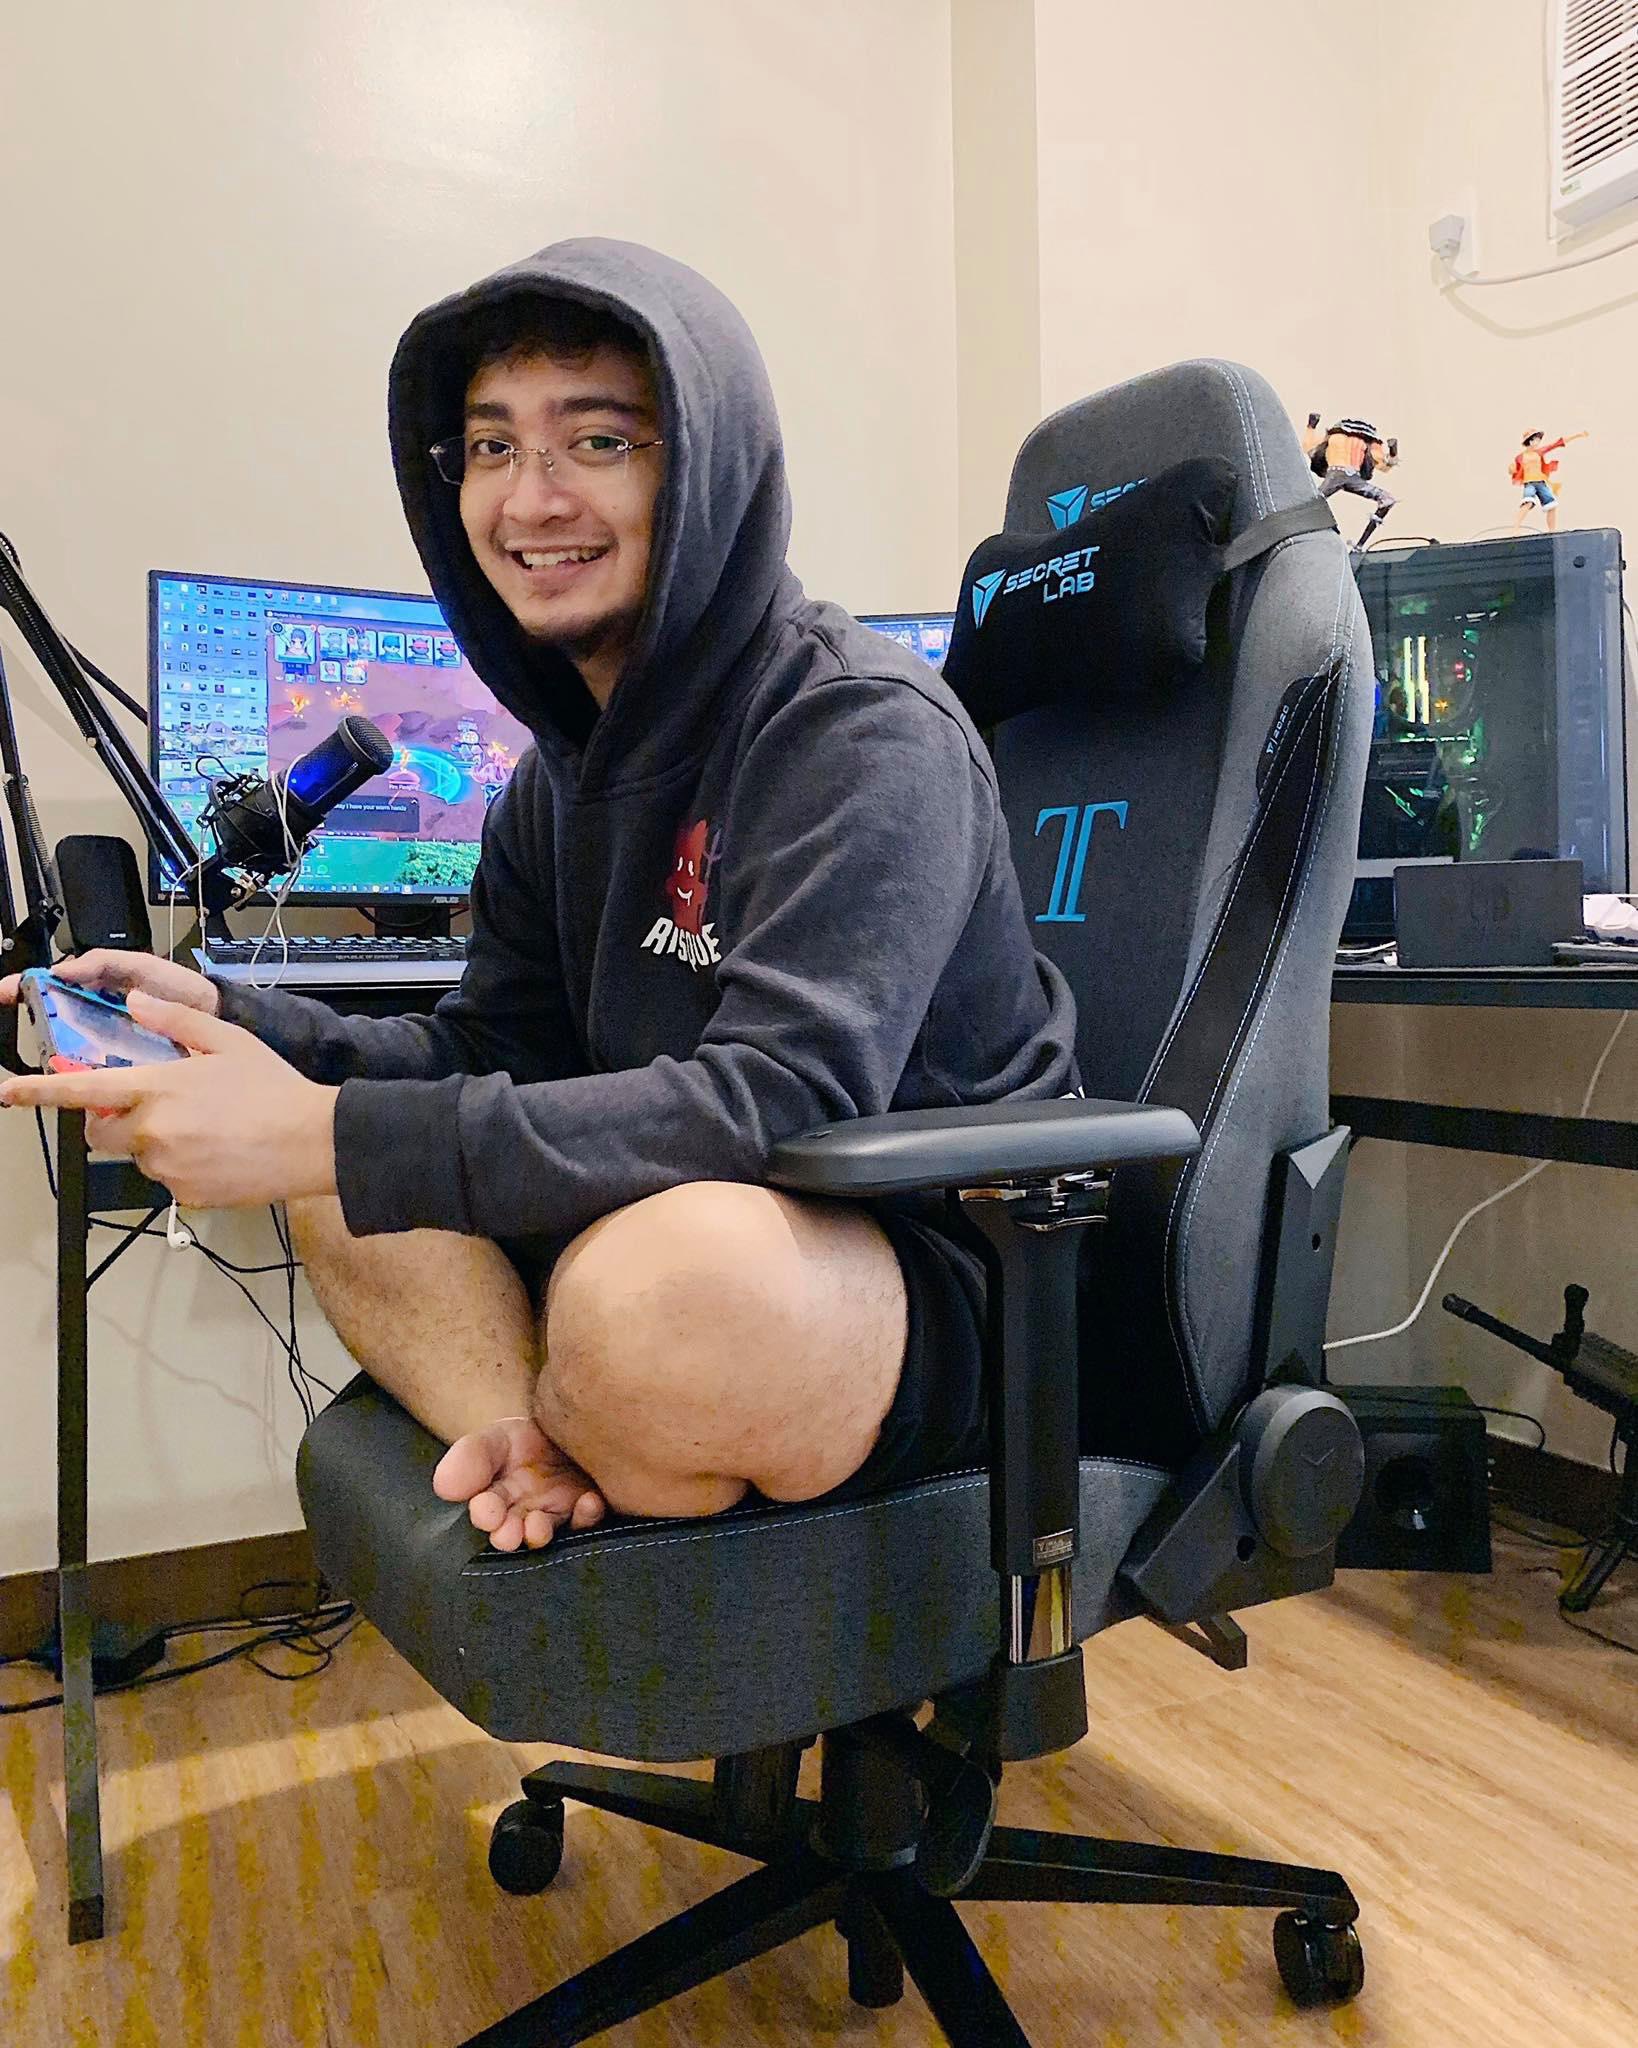 Shehyee On Twitter G O A T Gaming Chair Right Here Secretlab Model Secretlabchairs Titan 2020 Series Softweave Fabric Gaming Chair Charcoal Blue Where To Buy Shopee Https T Co D3sxlkyhey Lazada Https T Co 5p3lhtlchh Https T